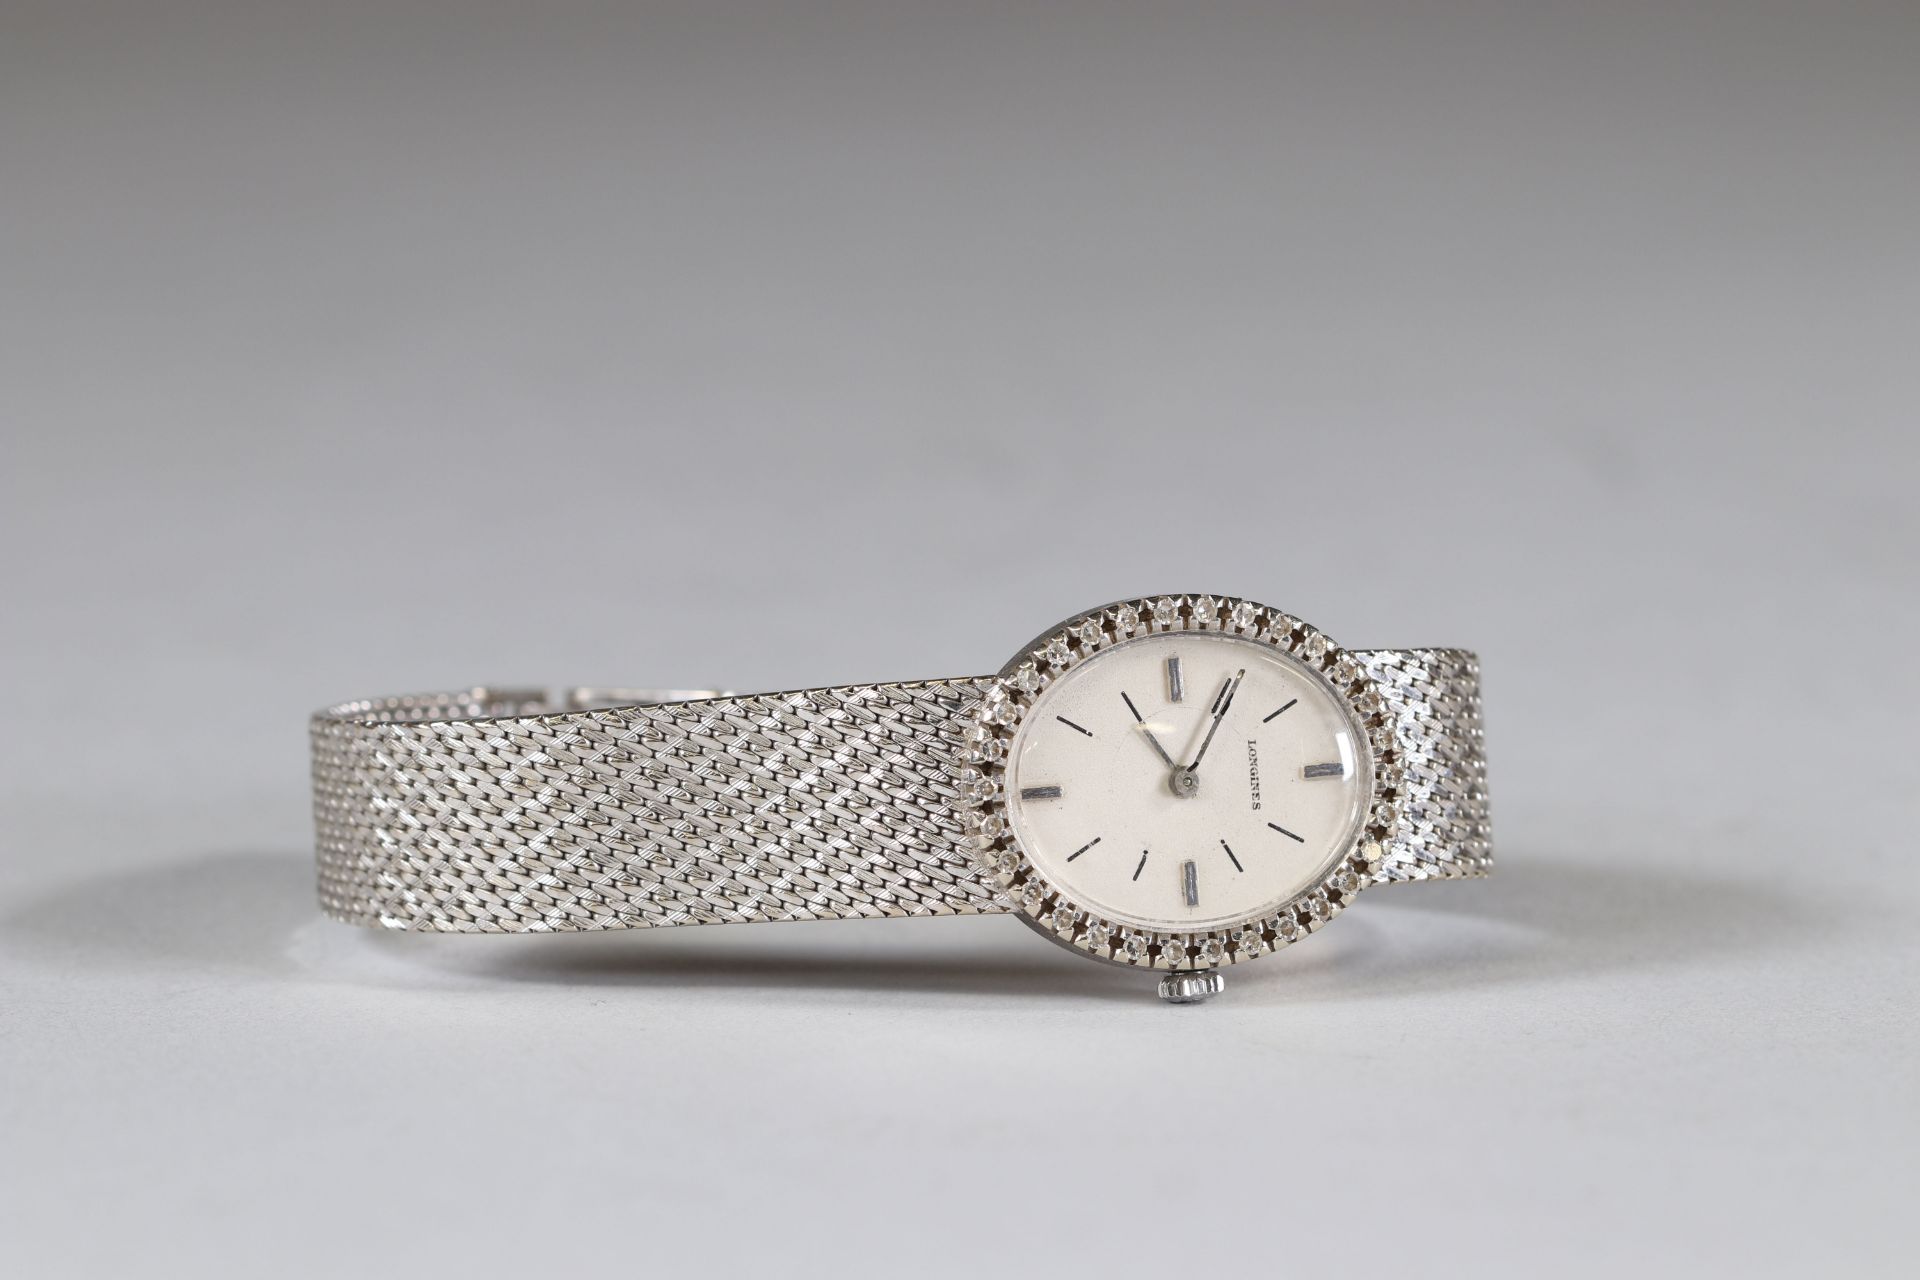 Longines watch in white gold (18k) and diamonds - Image 3 of 3